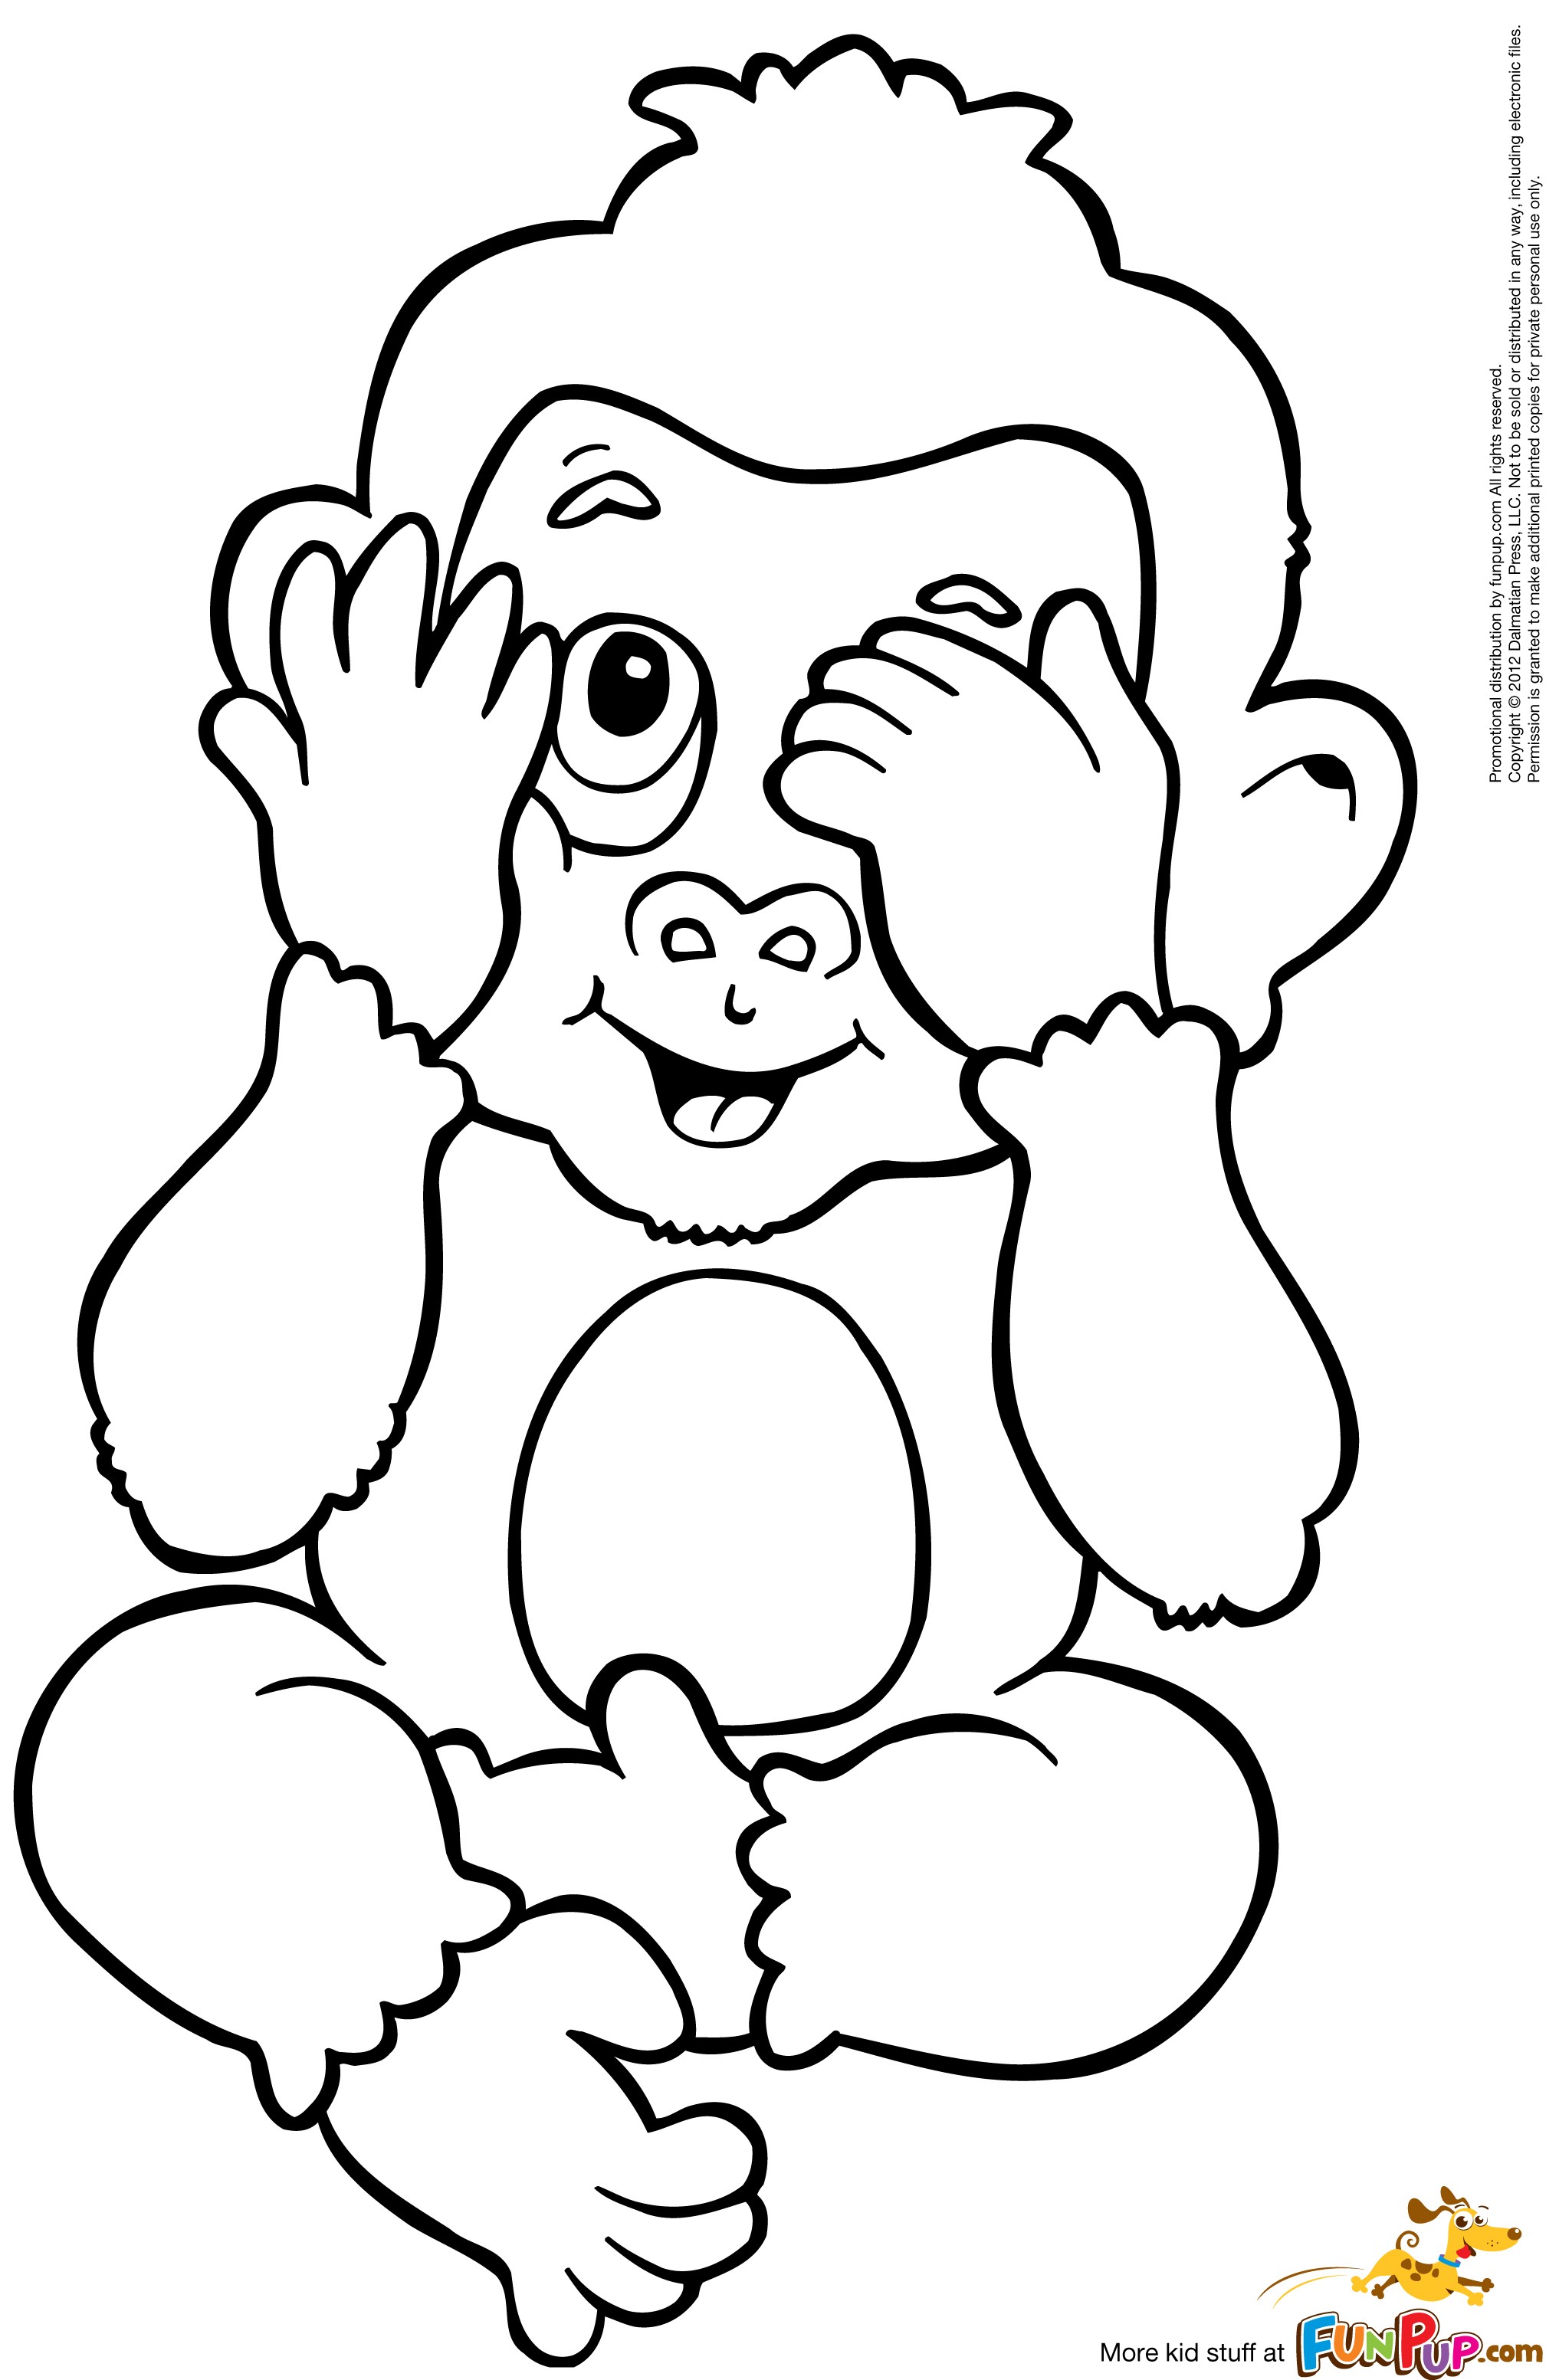 Baby monkey coloring pages to download and print for free